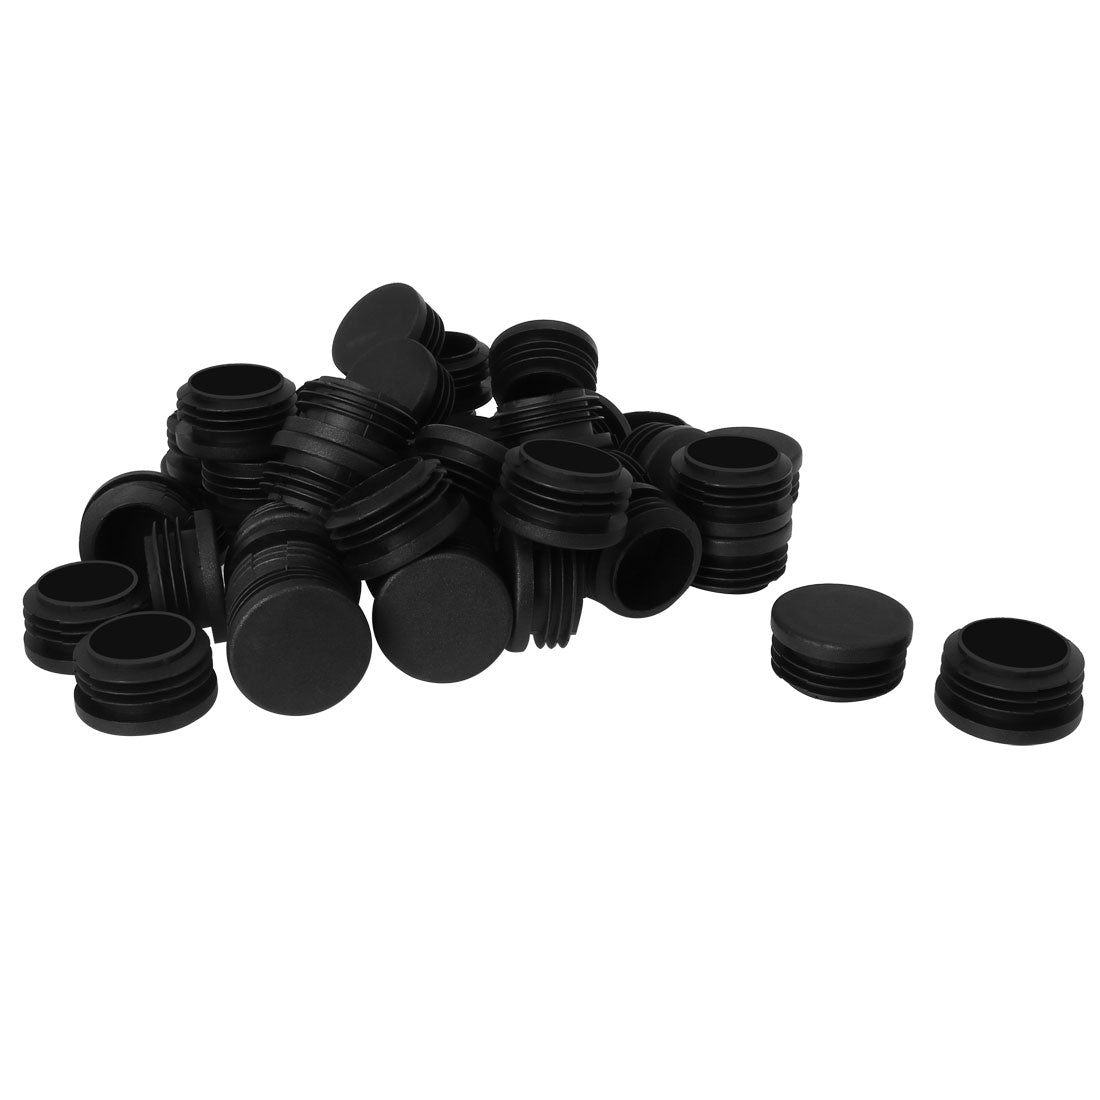 Uxcell Uxcell 1 1/4 " 1.26" OD Plastic Round Tube Insert Glide End Cap Pad 45pcs 1.14"-1.22" Inner Dia for Office Table Feet Reduce Noise